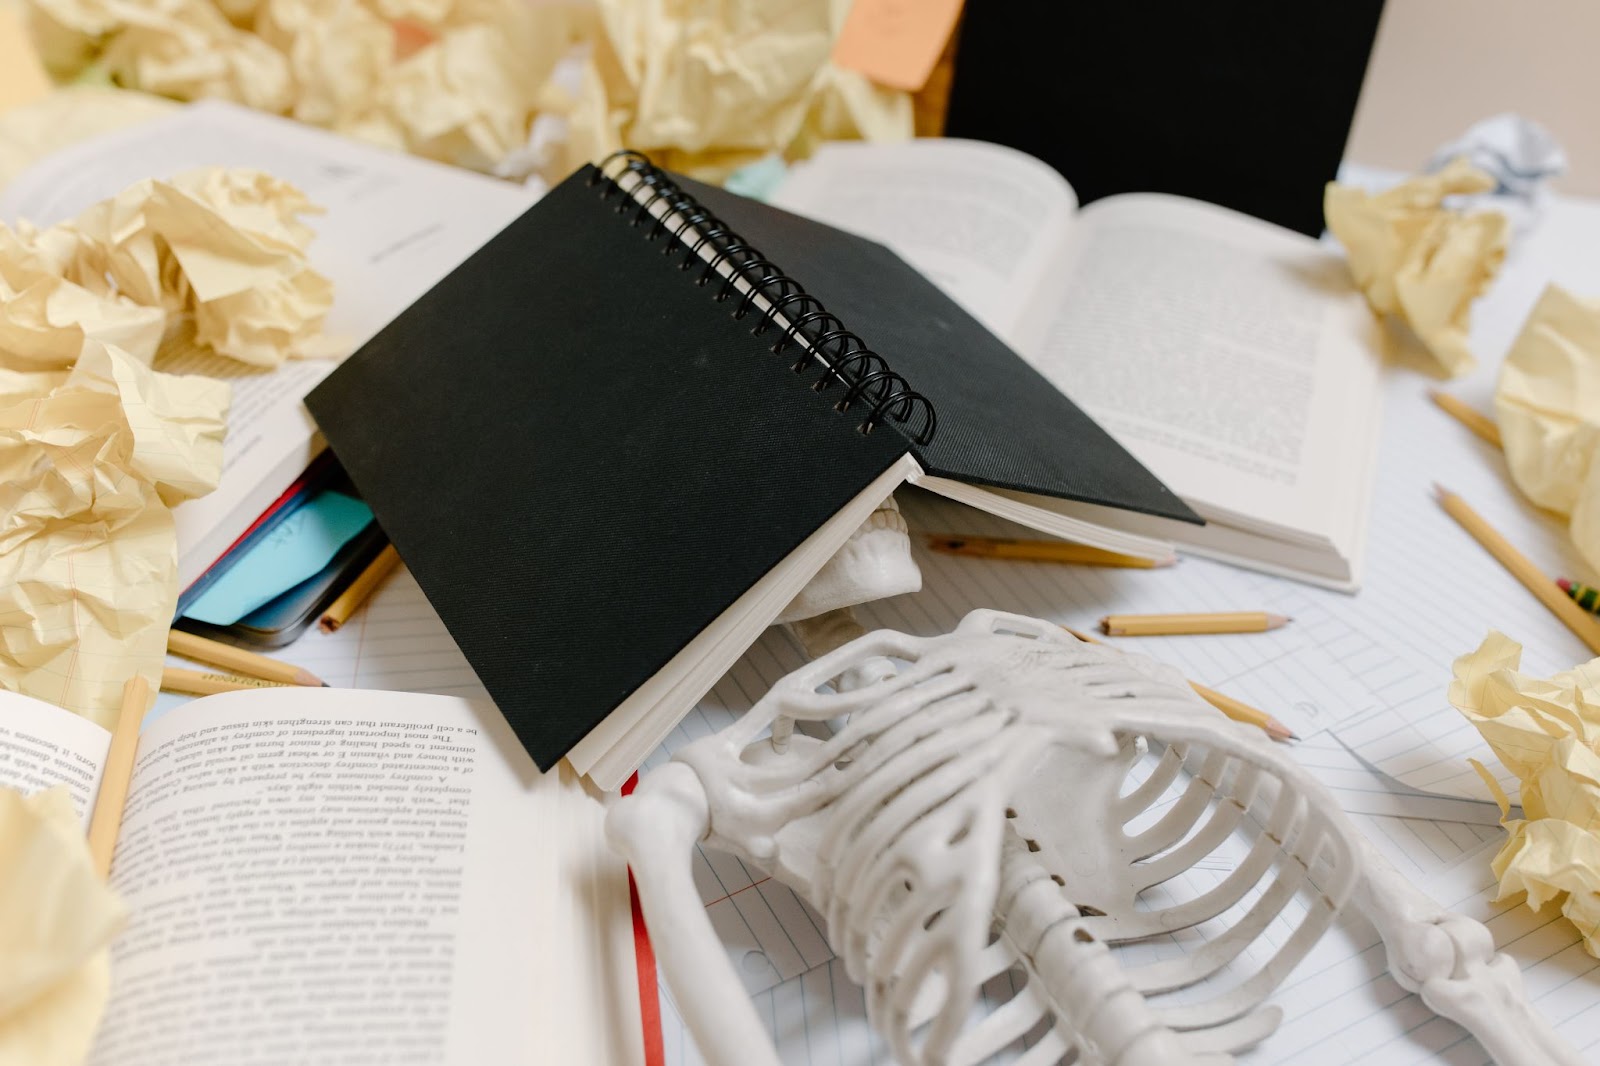 skeleton with book over its head, surrounded by books and crumpled up papers